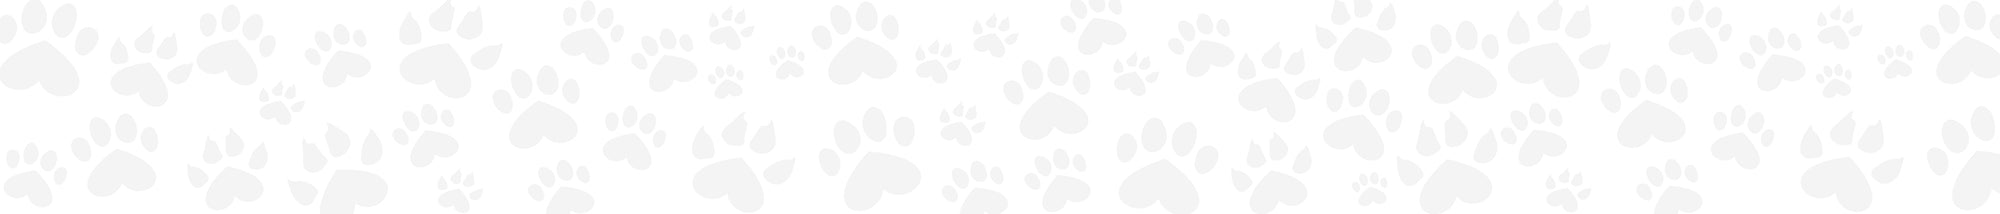 Light paw background by toe beans